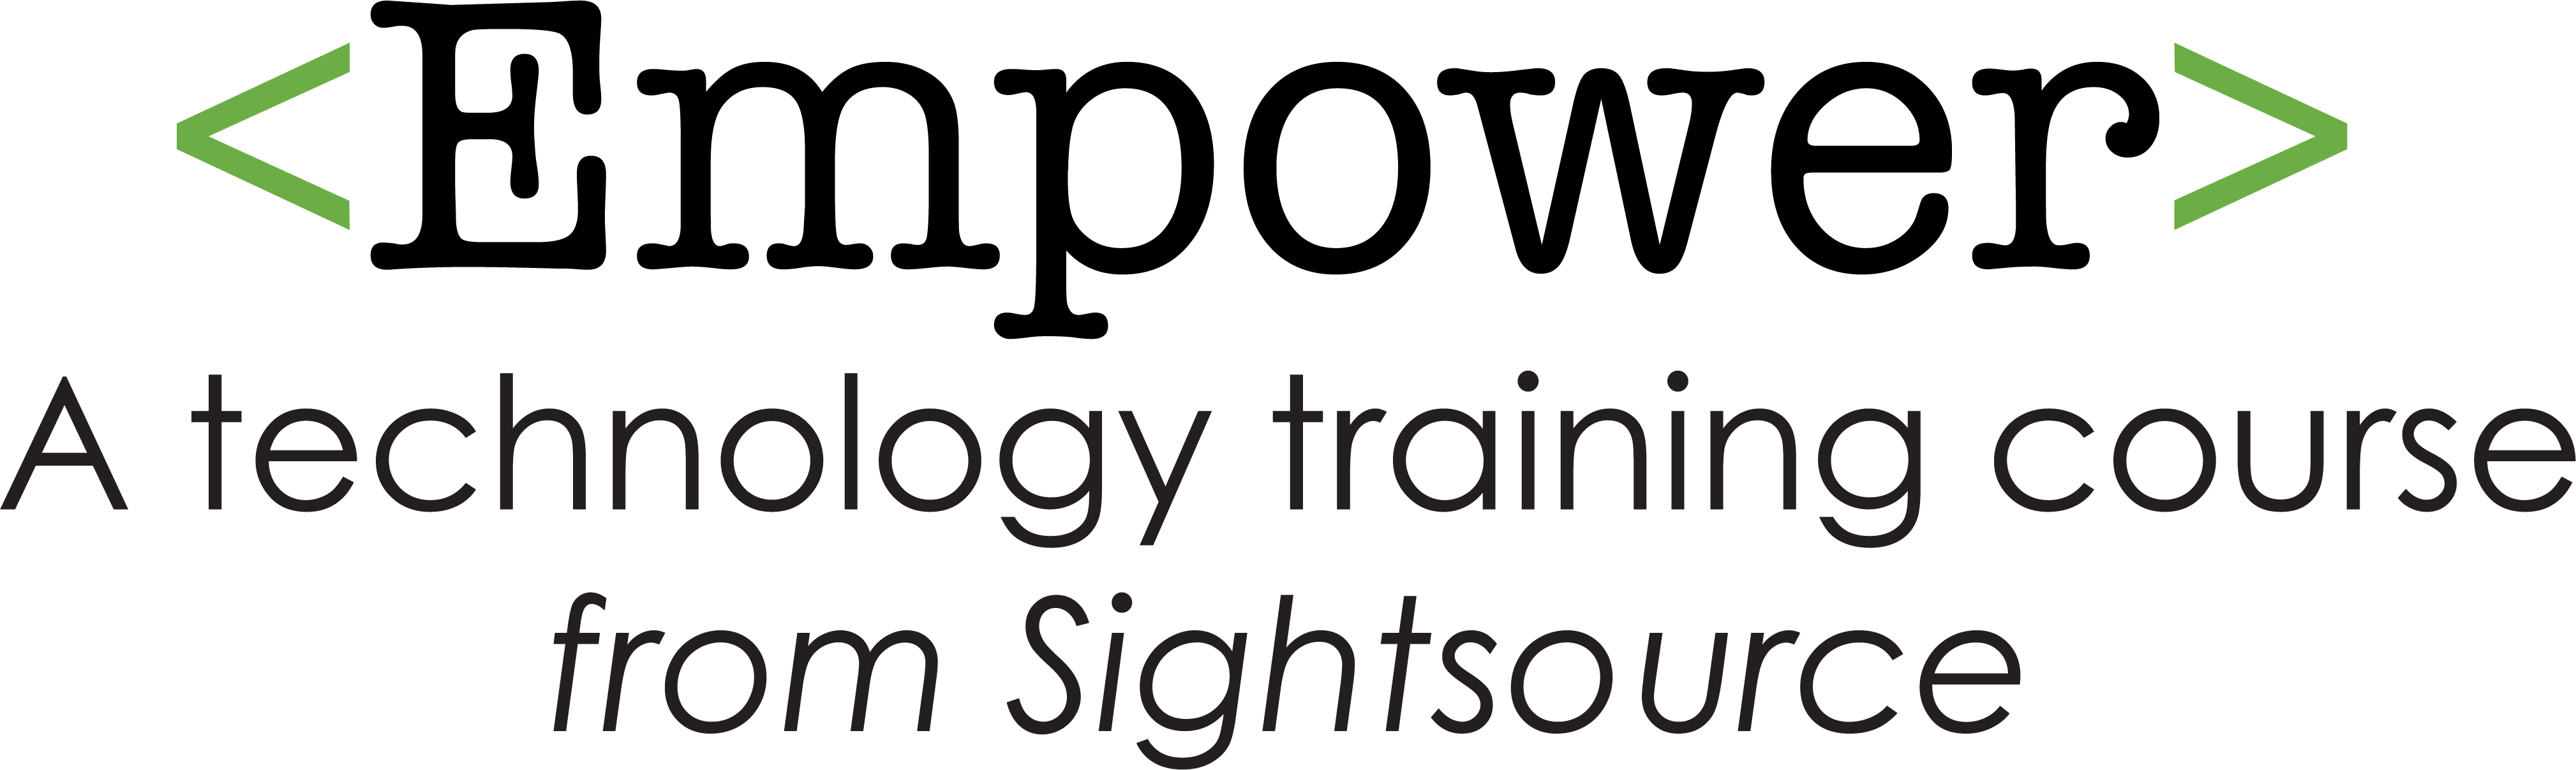 Empower - A technology training course from Sightsource